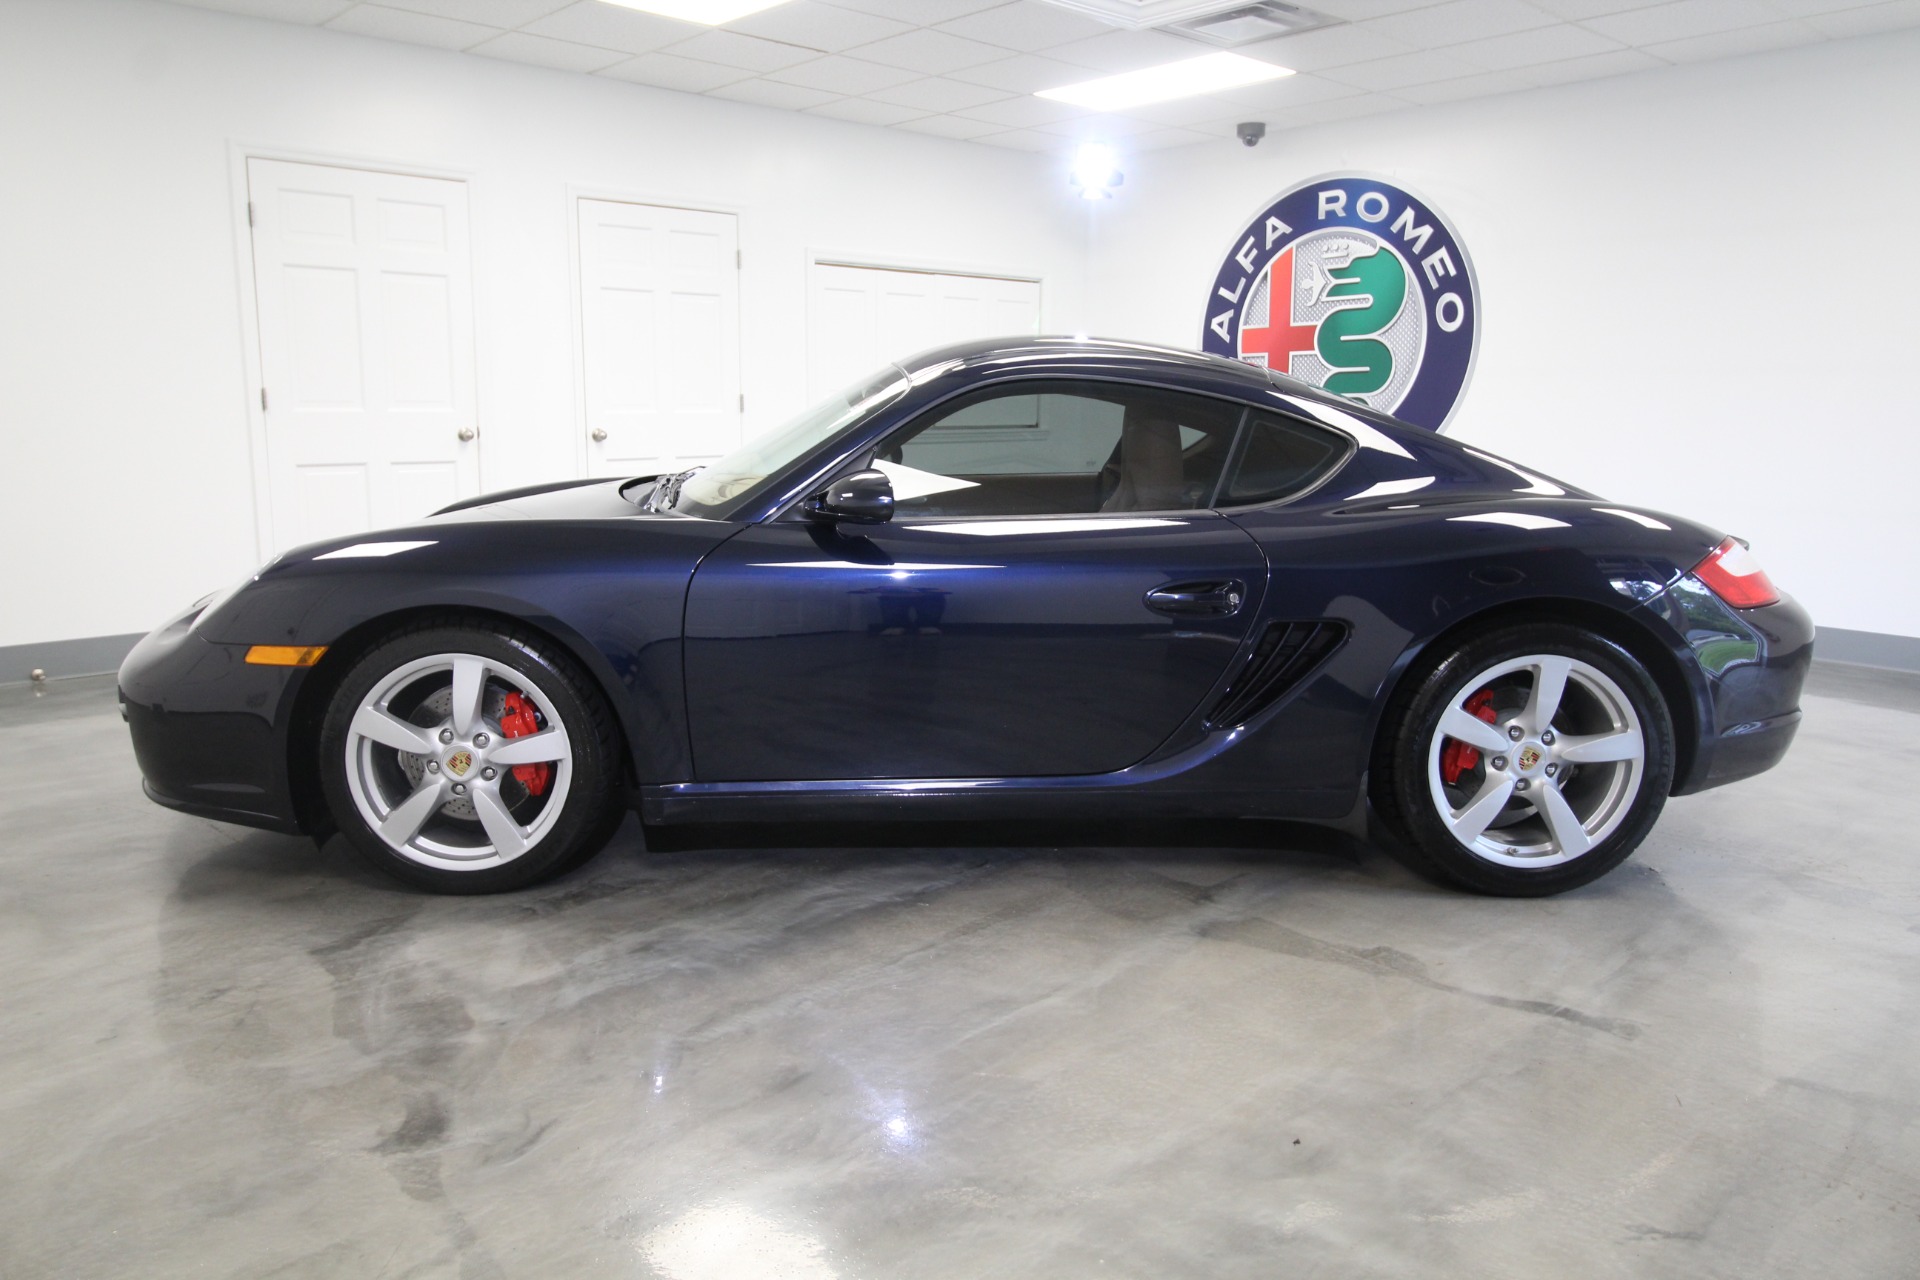 Used 2007 Midnight Blue Metallic Porsche Cayman S Fully Serviced Clean Cayman | Albany, NY